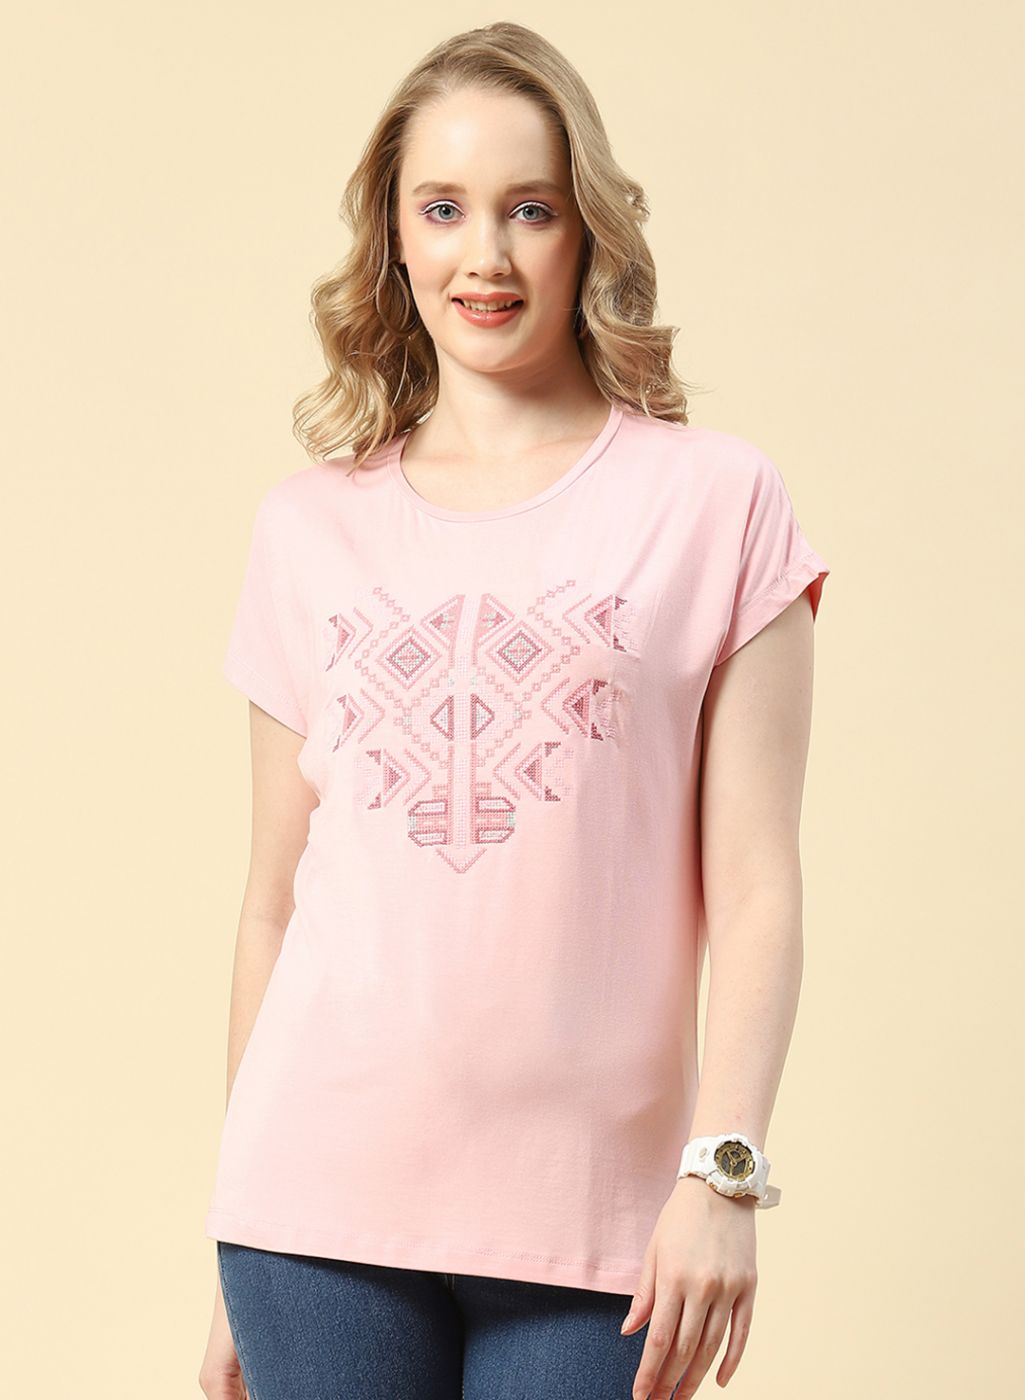 Buy Womens Multi Color Printed Tops Online in India - Monte Carlo